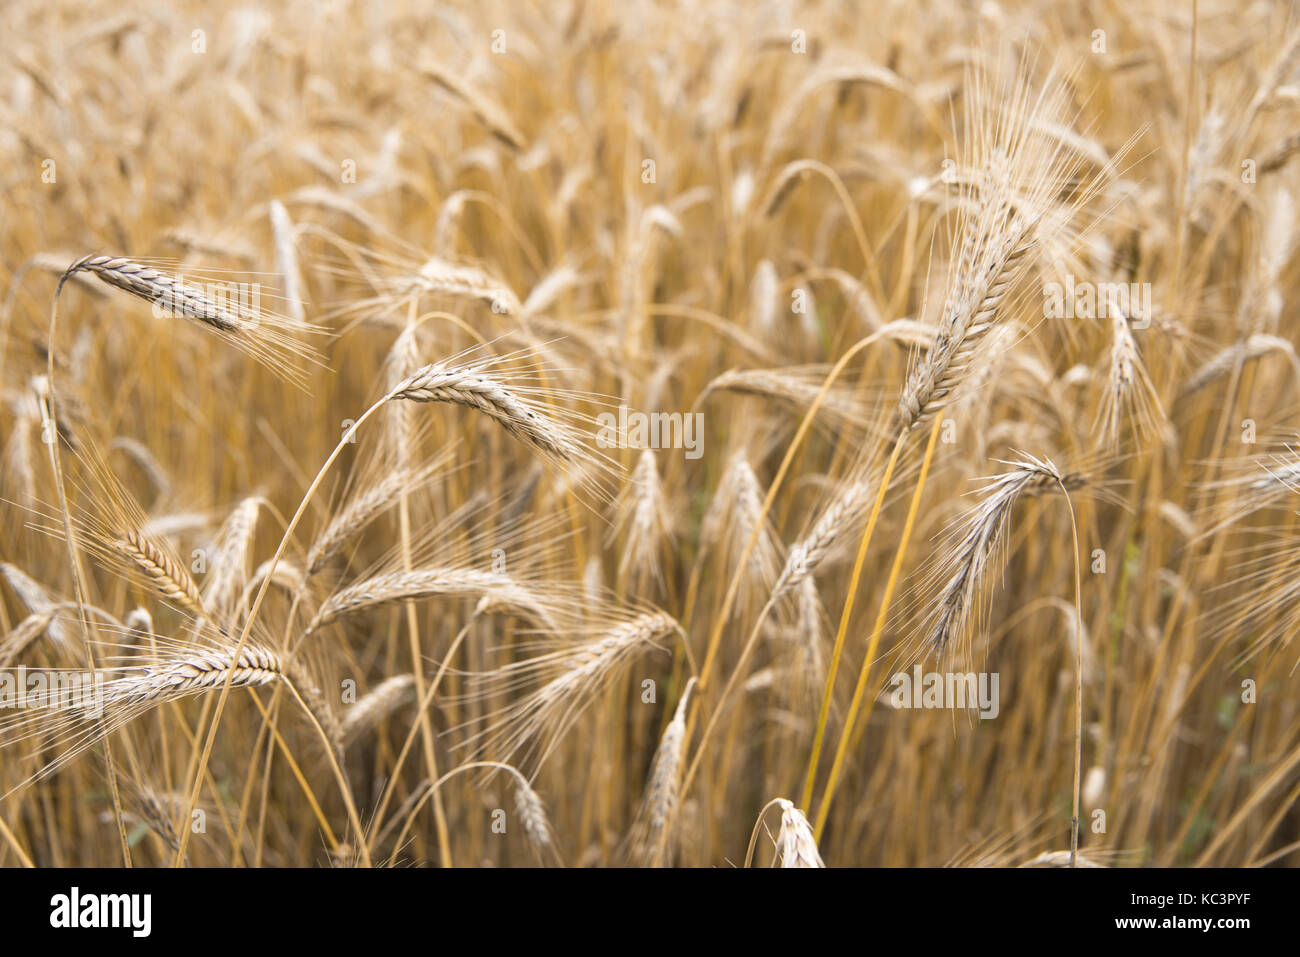 Wheat sprouts growing in the field, in the sunlight Stock Photo